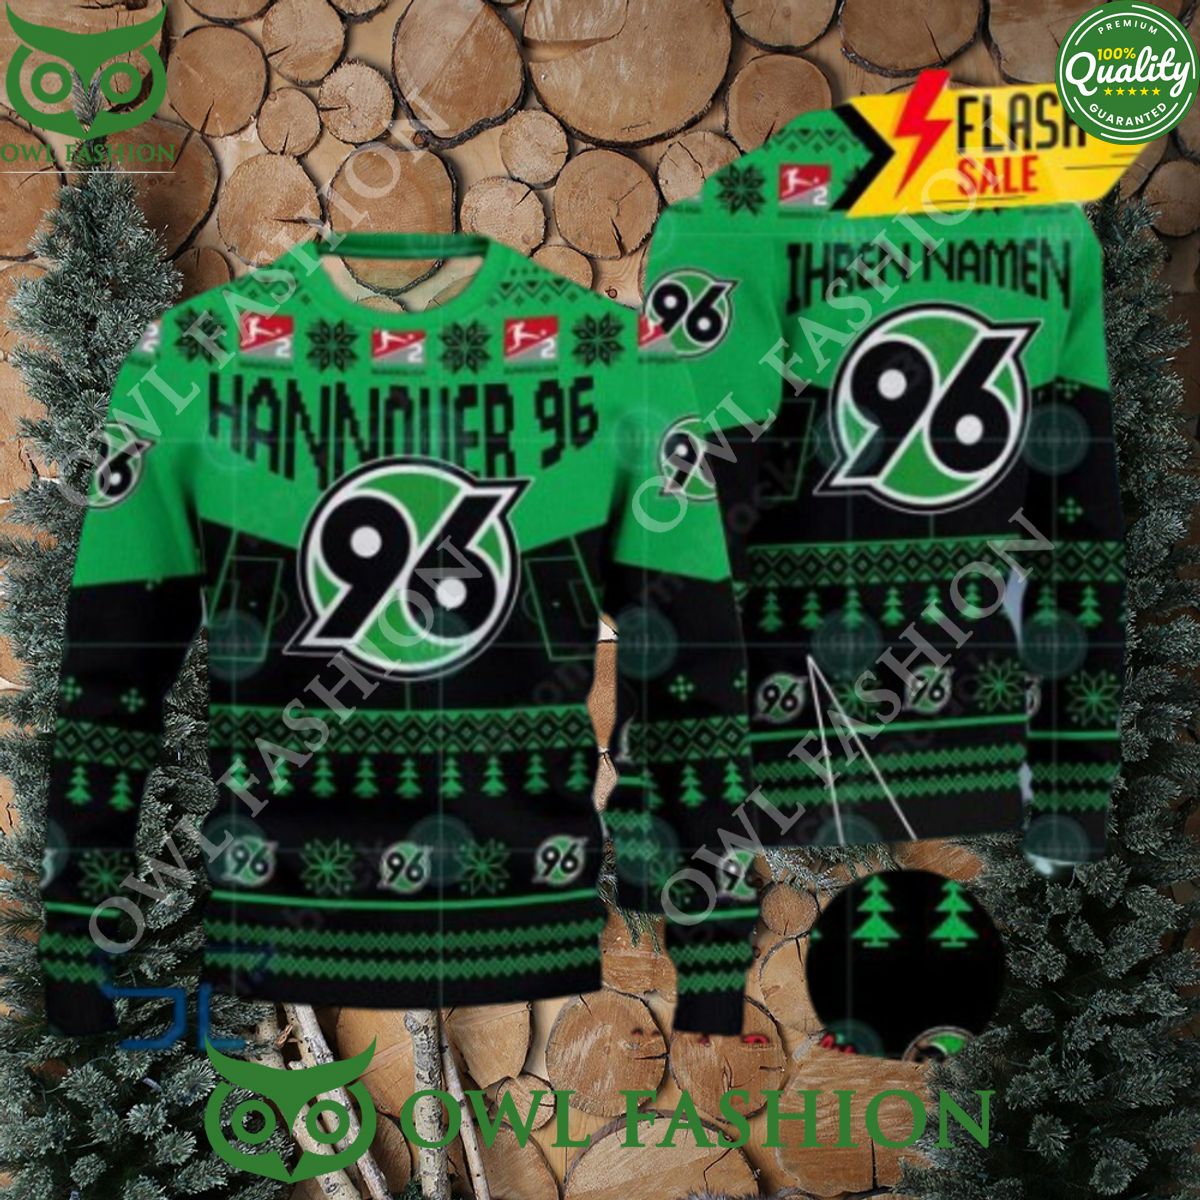 personalized name hannover 96 stadium ugly christmas sweater 1 HLsNS.jpg